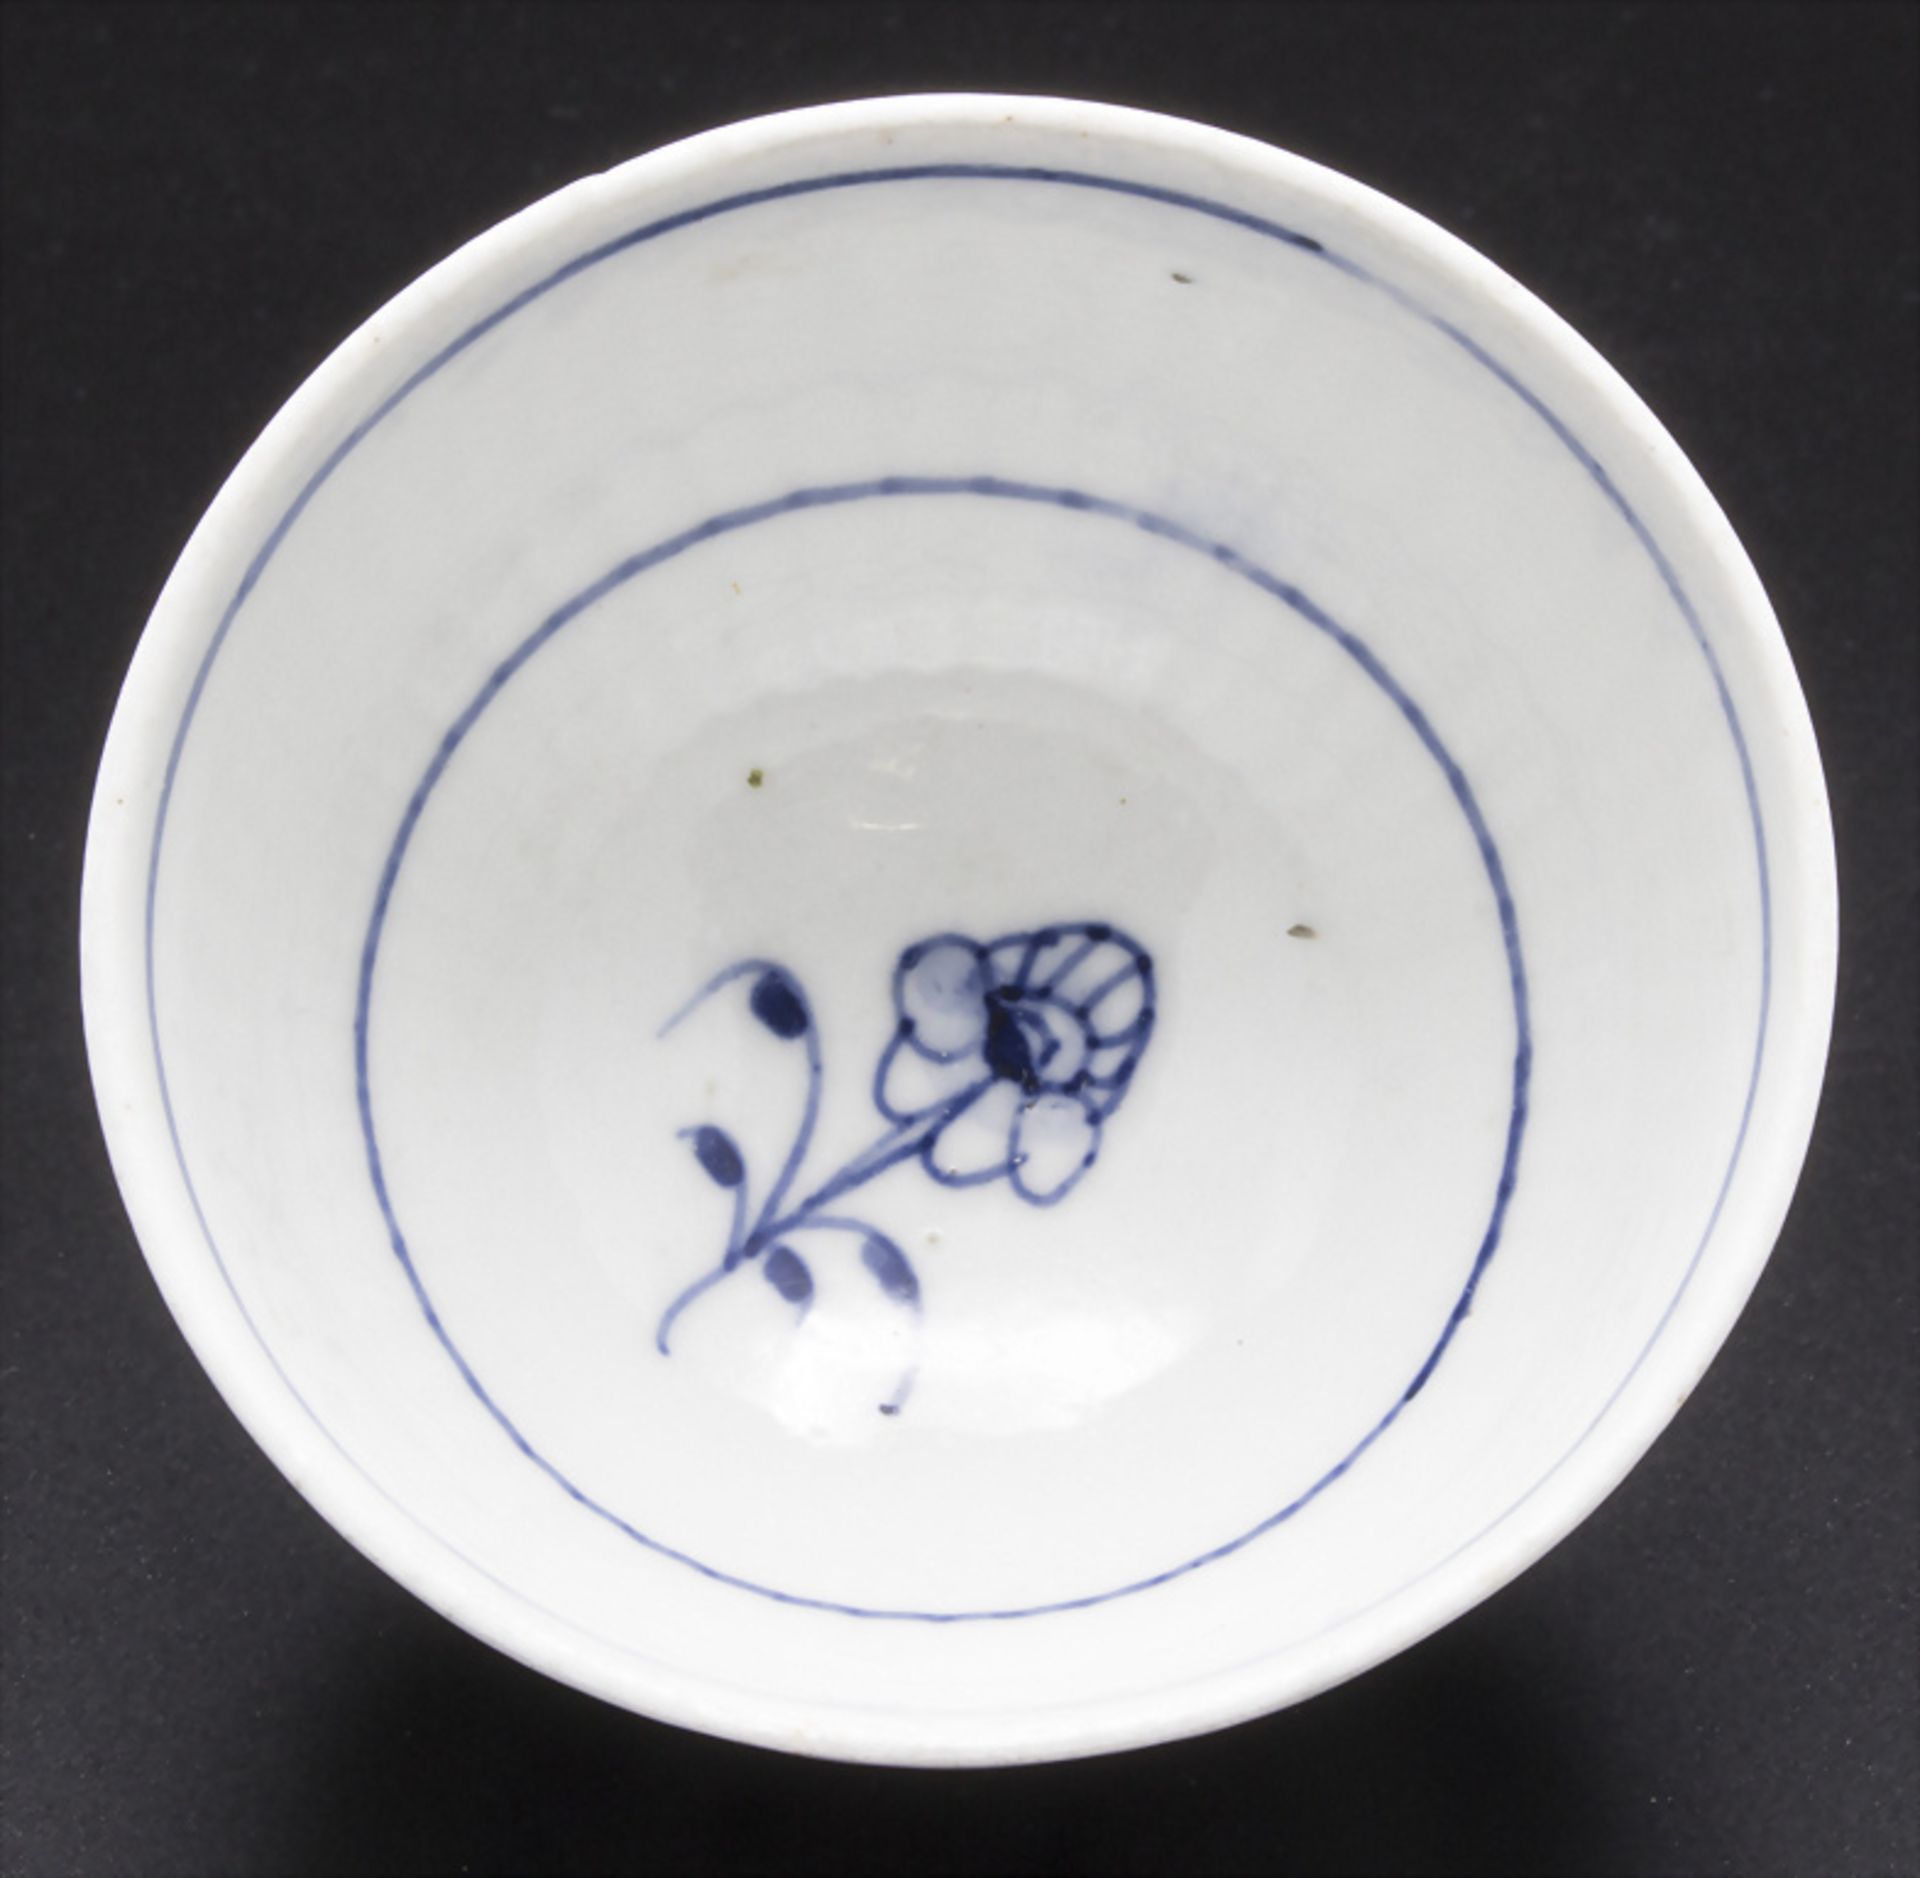 Koppchen mit Blaumalerei / A coupling with blue Indian pattern, Meissen, Marcolini-Periode, um 1780 - Image 3 of 5